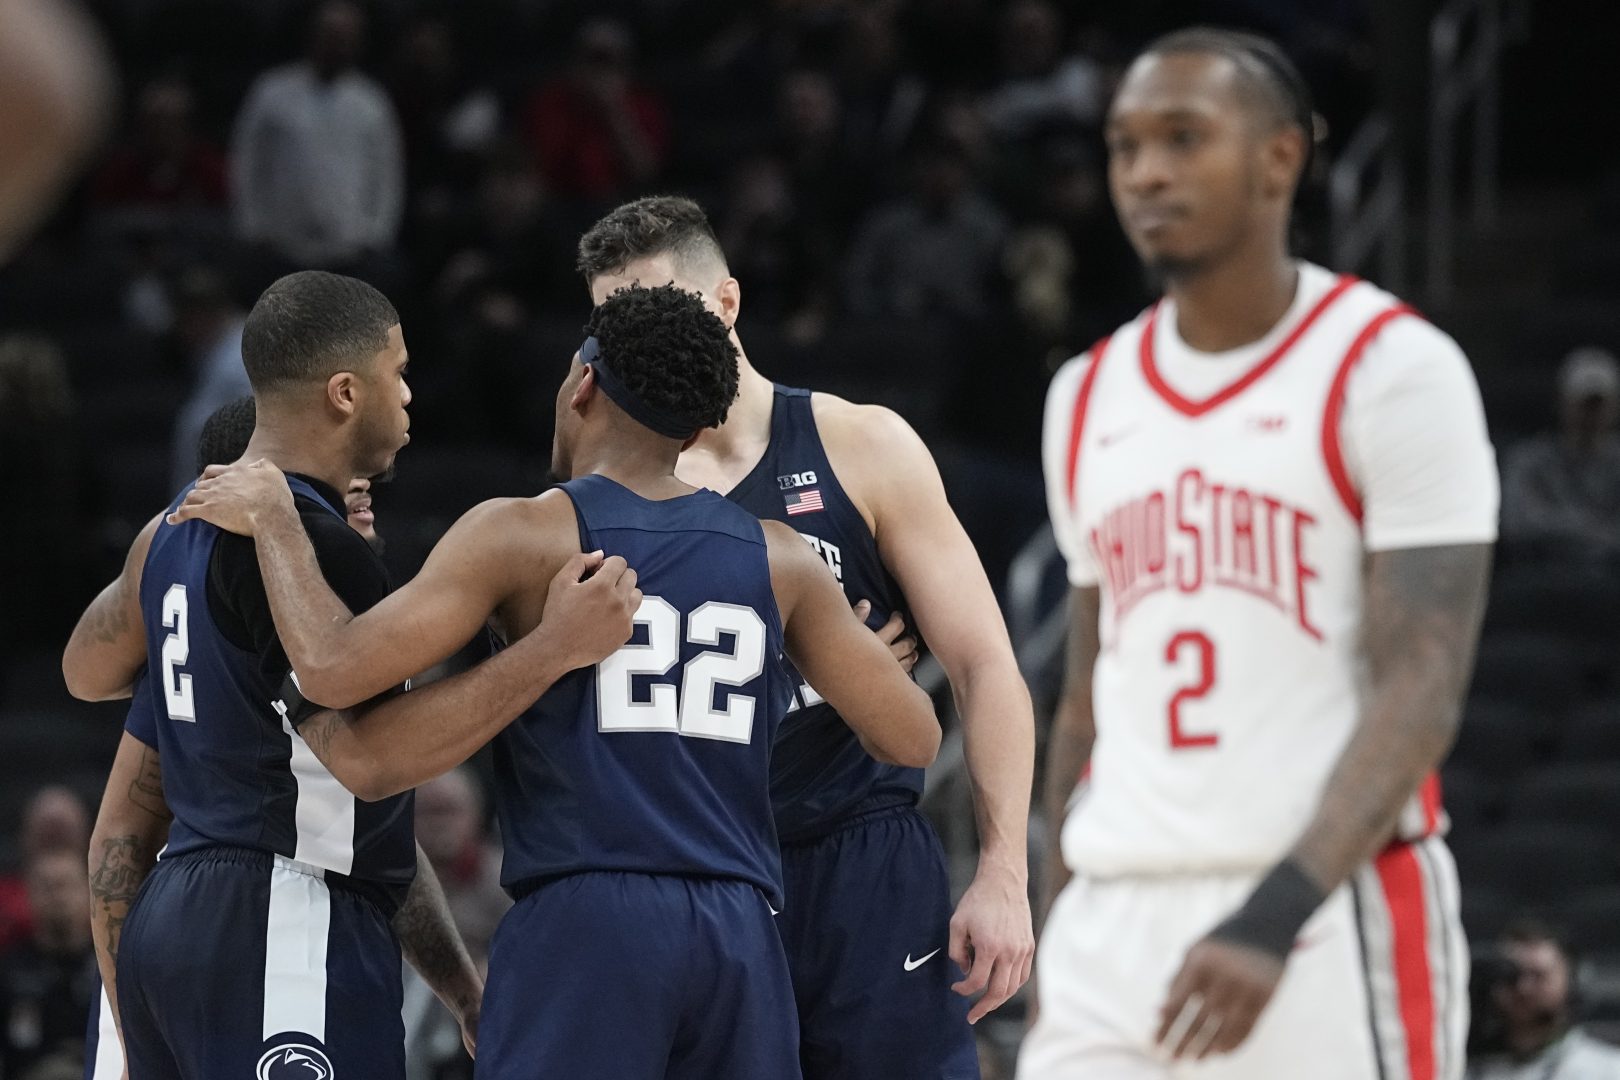 Penn State's Jalen Pickett (22) talks with his teammates during the second half of an NCAA college basketball game against Ohio State at the Big Ten Conference tournament, Thursday, March 10, 2022, in Indianapolis. (AP Photo/Darron Cummings)